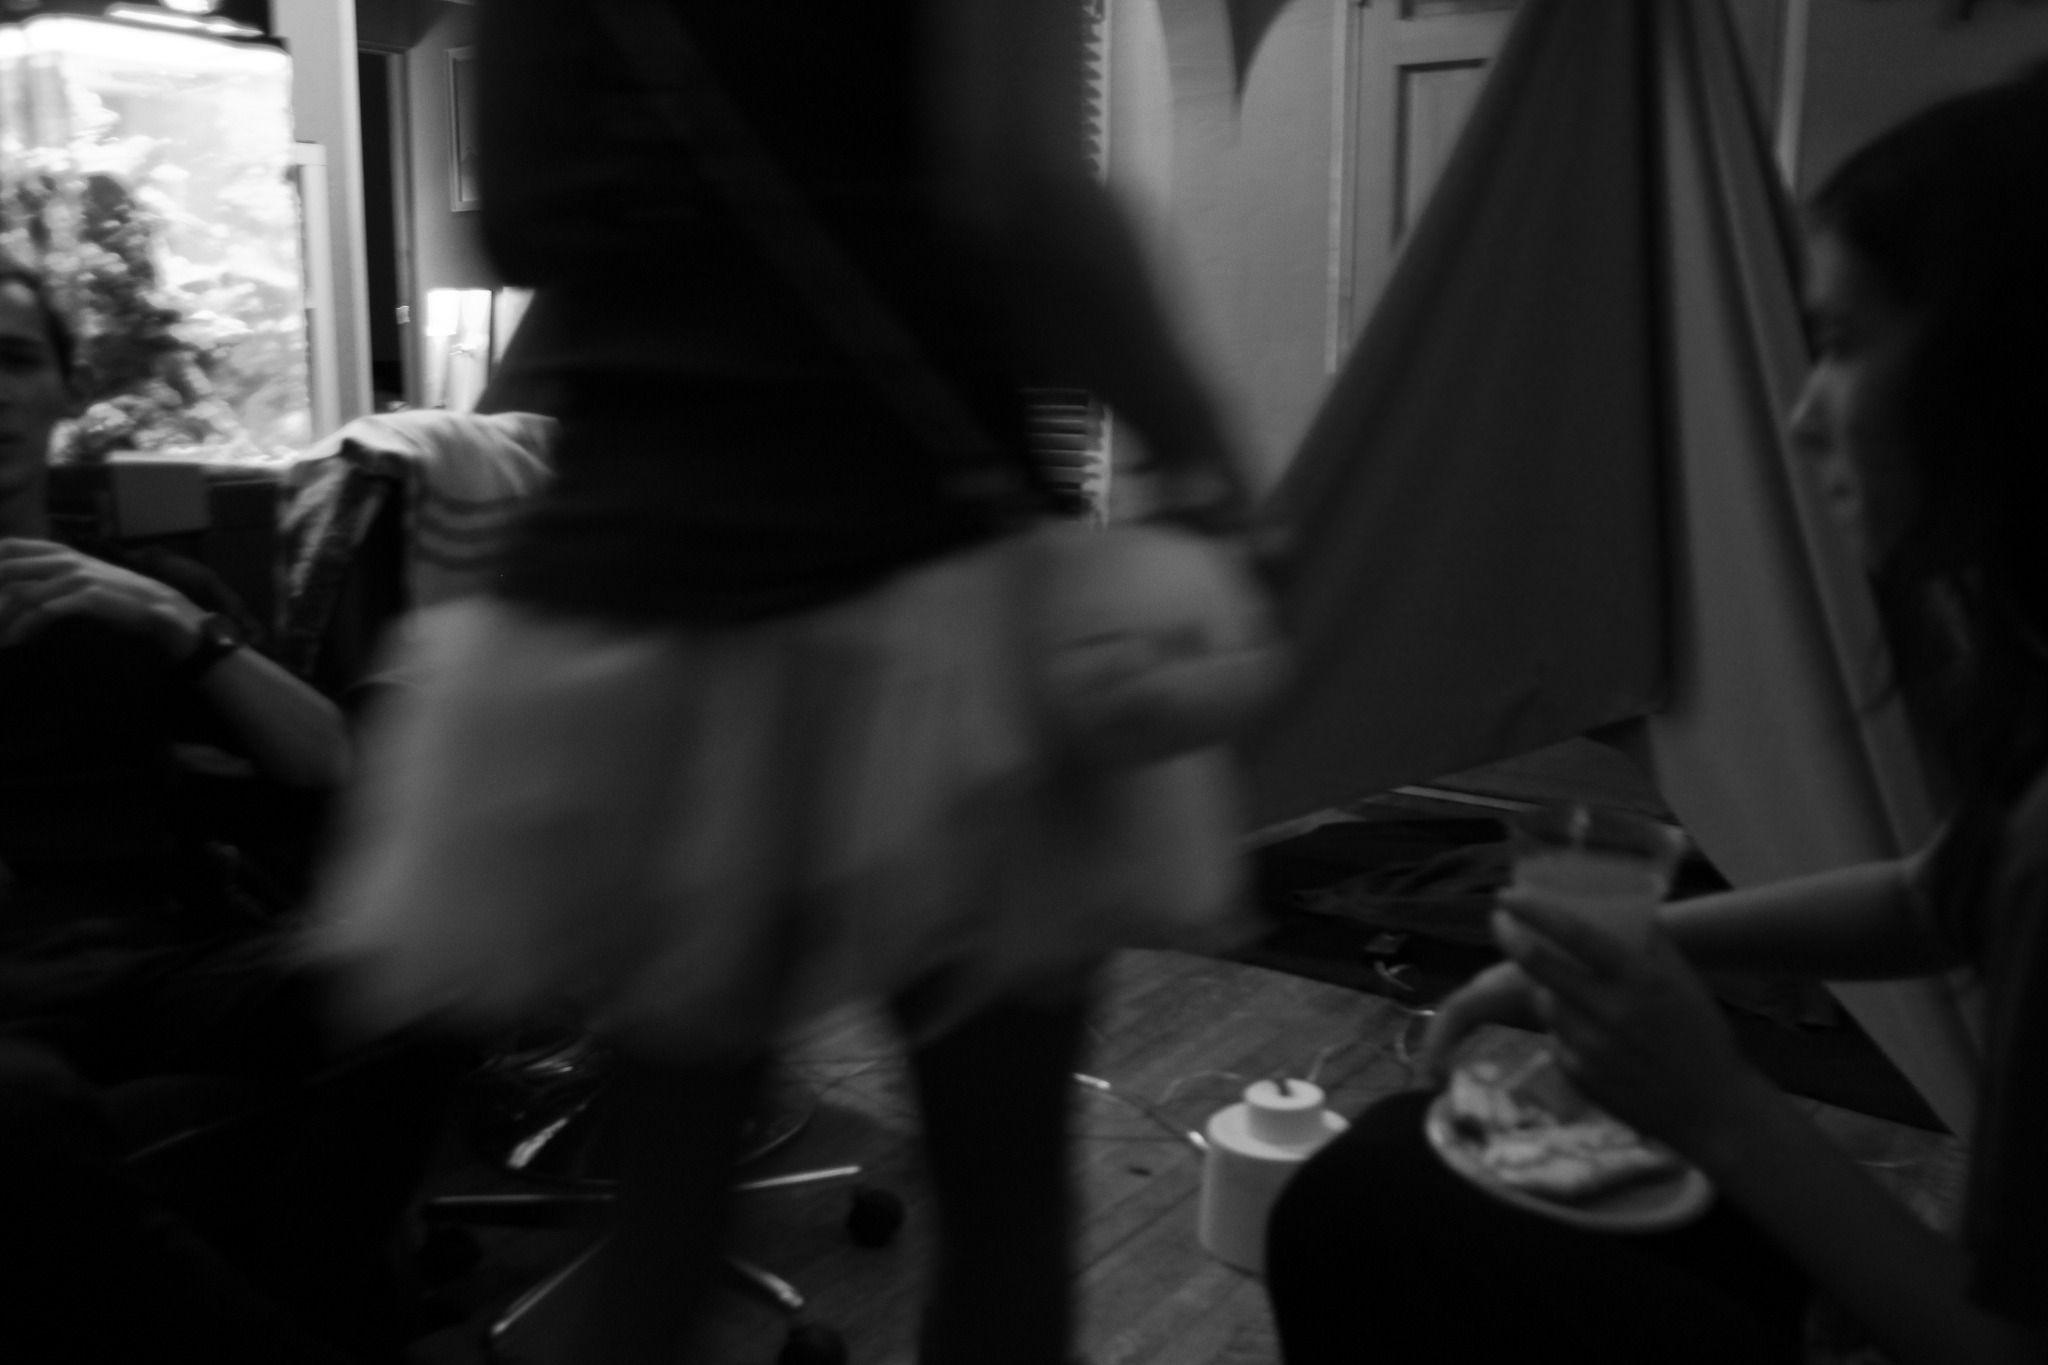 This is a blurry grayscale photo of someone walking in front of the camera. There is a tent inside the room visible in the background.